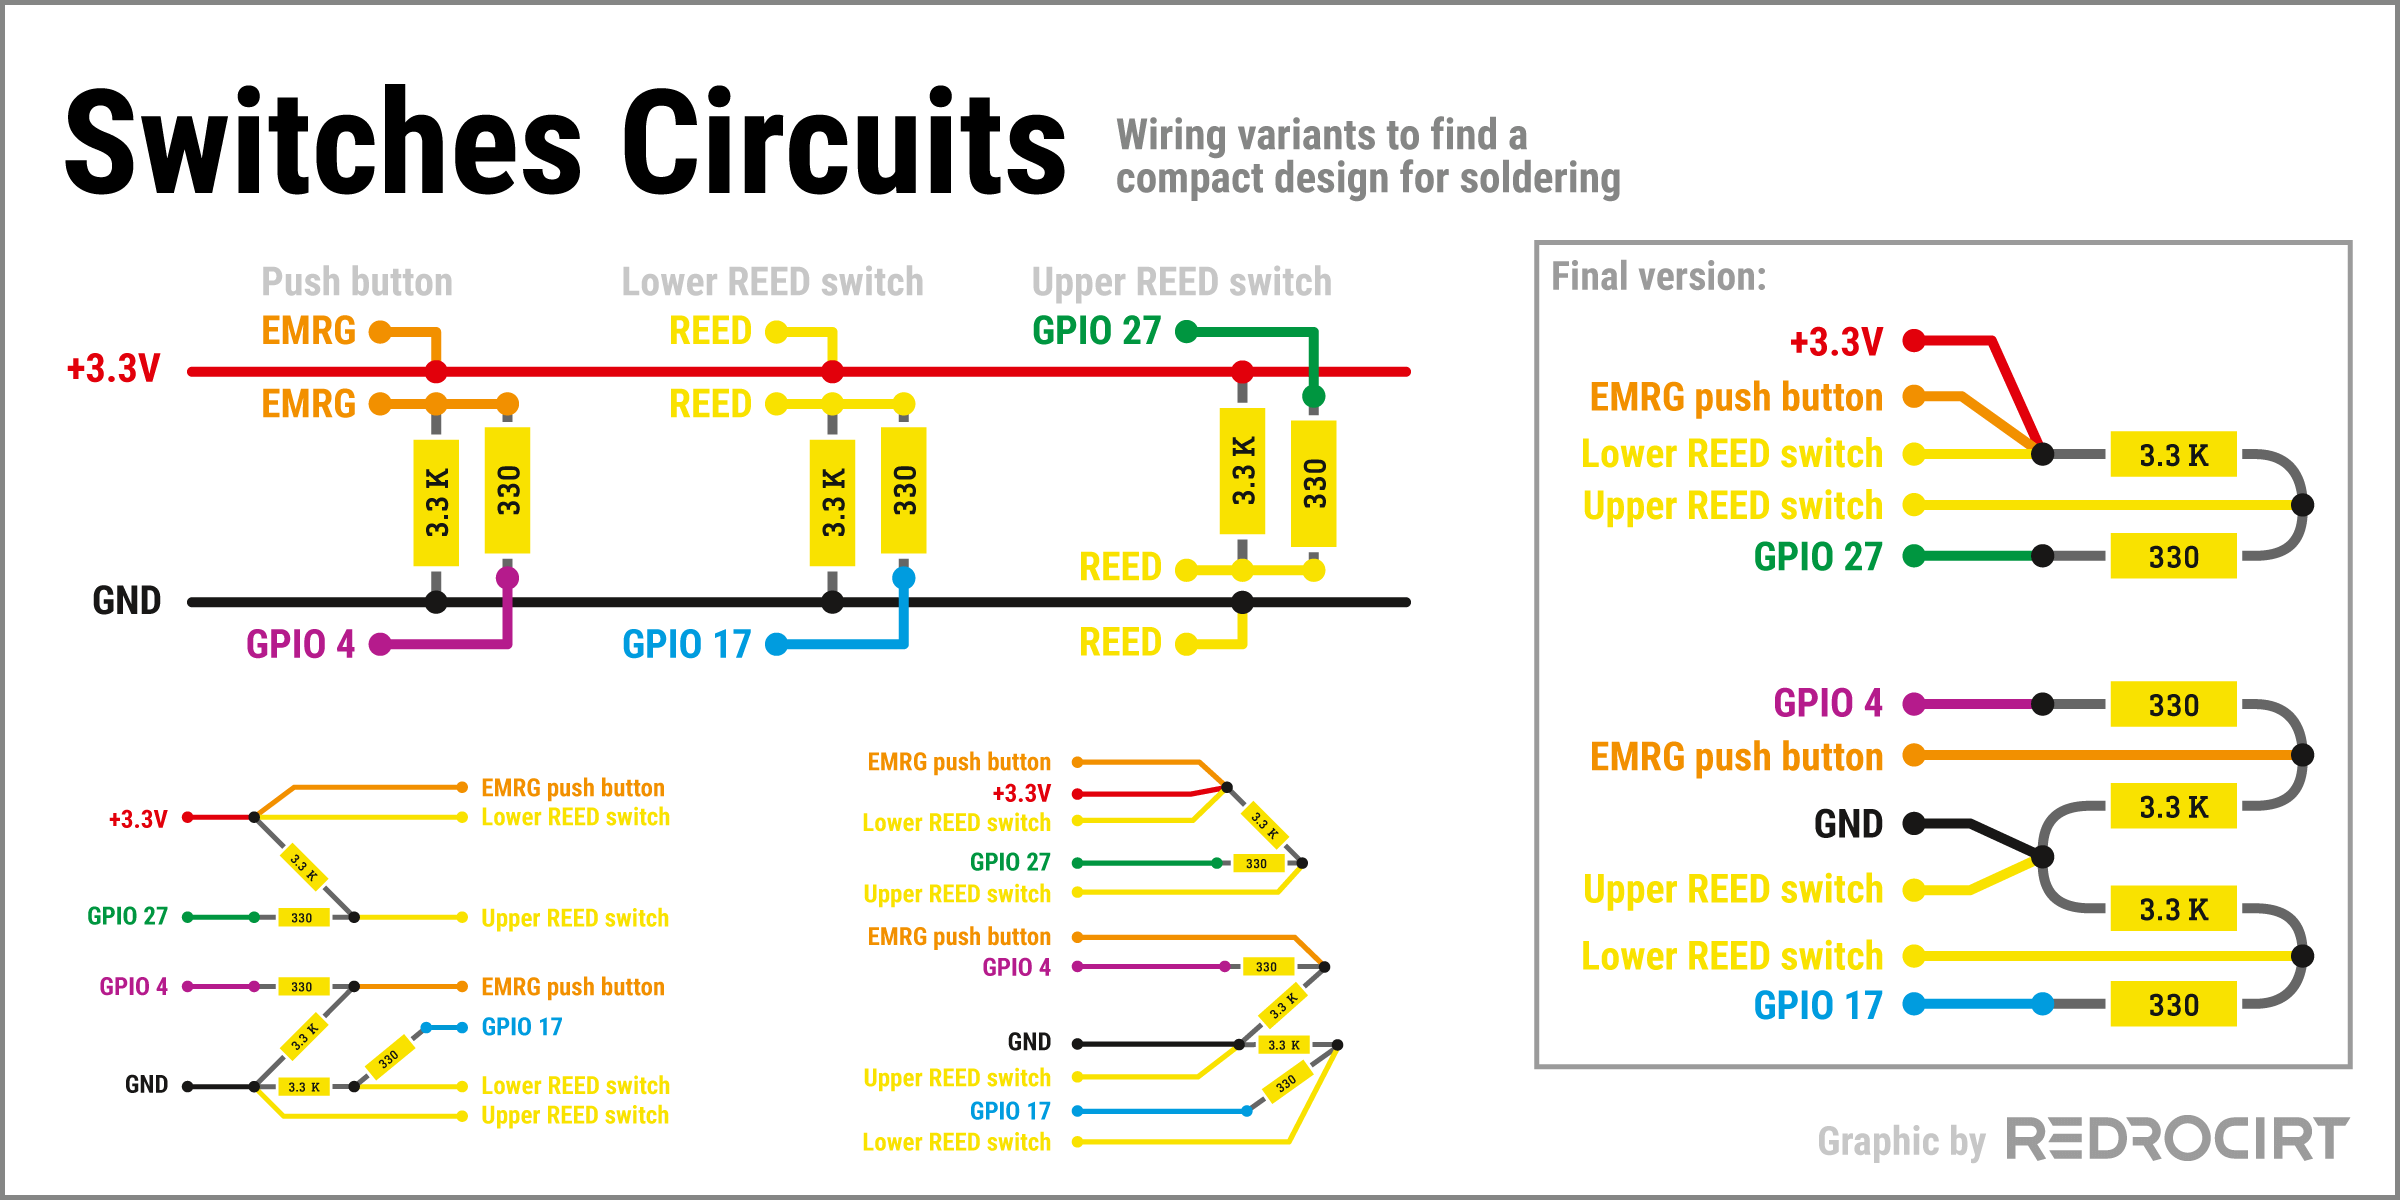 Switches circuits